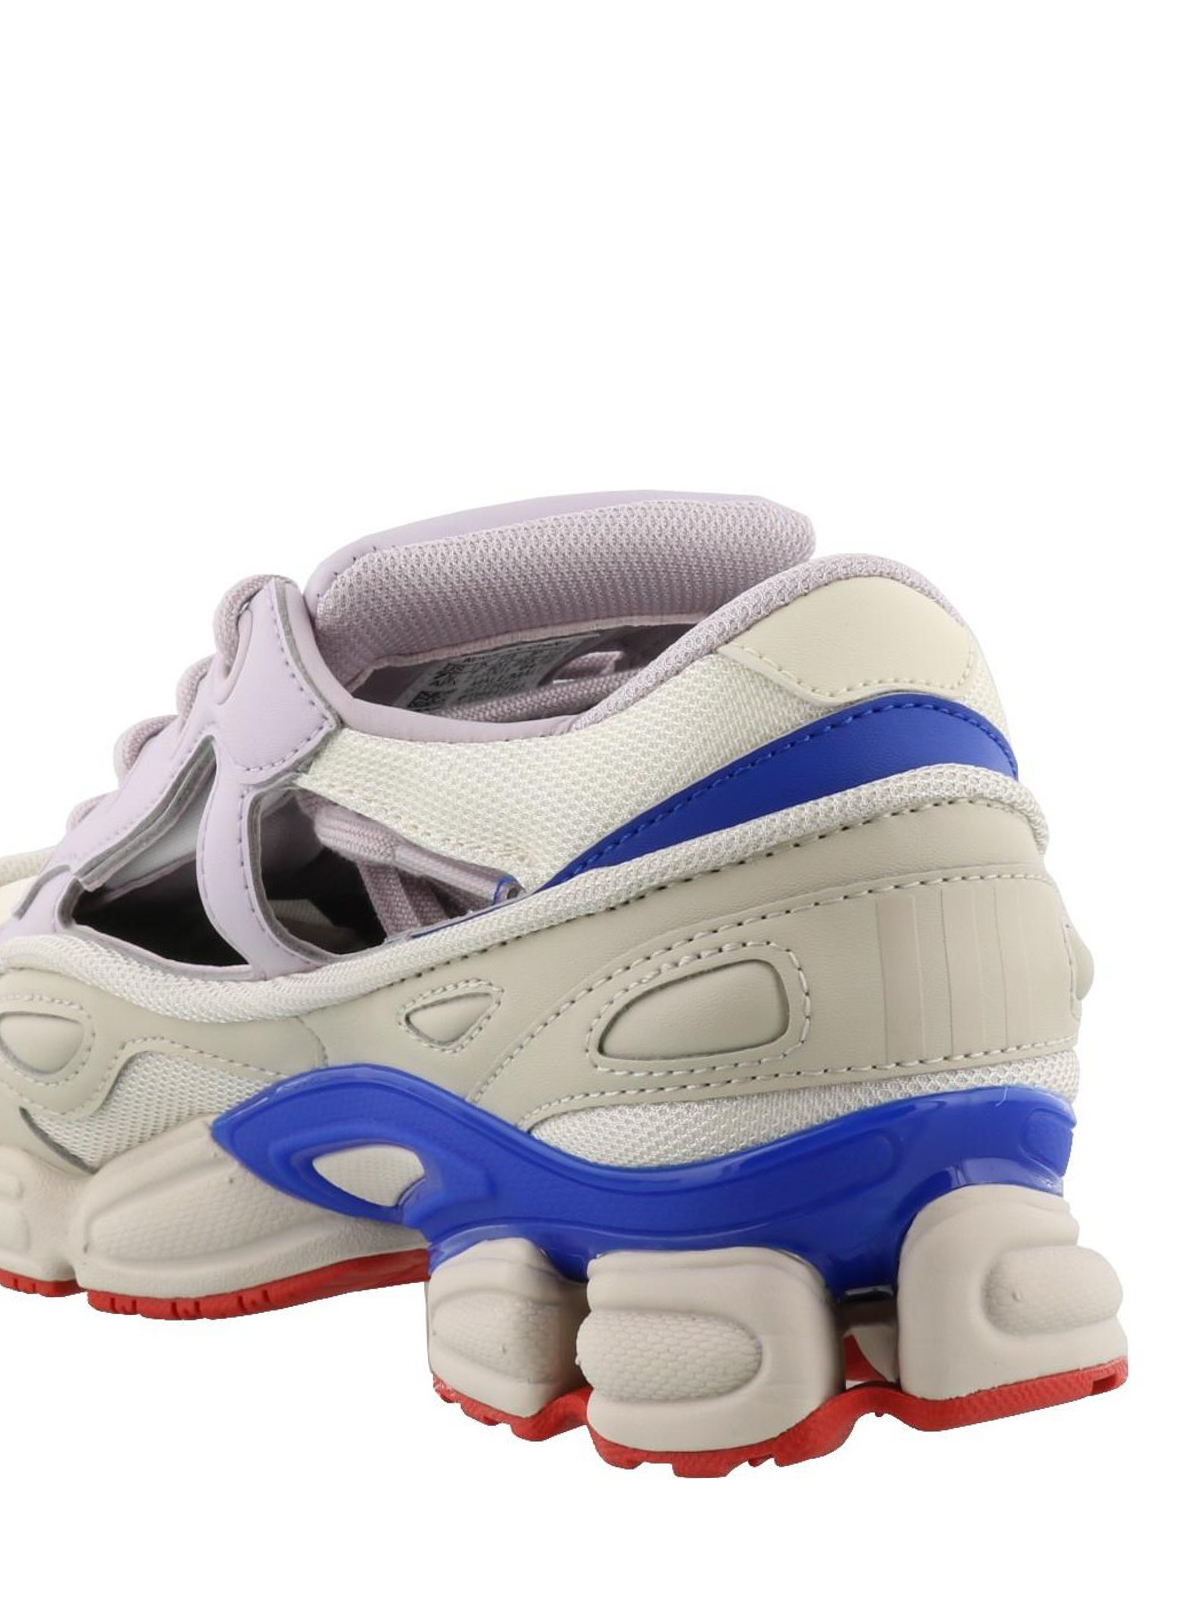 Weggegooid Logisch AIDS Trainers Raf Simons Adidas - Rs Replicant Ozweego cut out sneakers - F34237